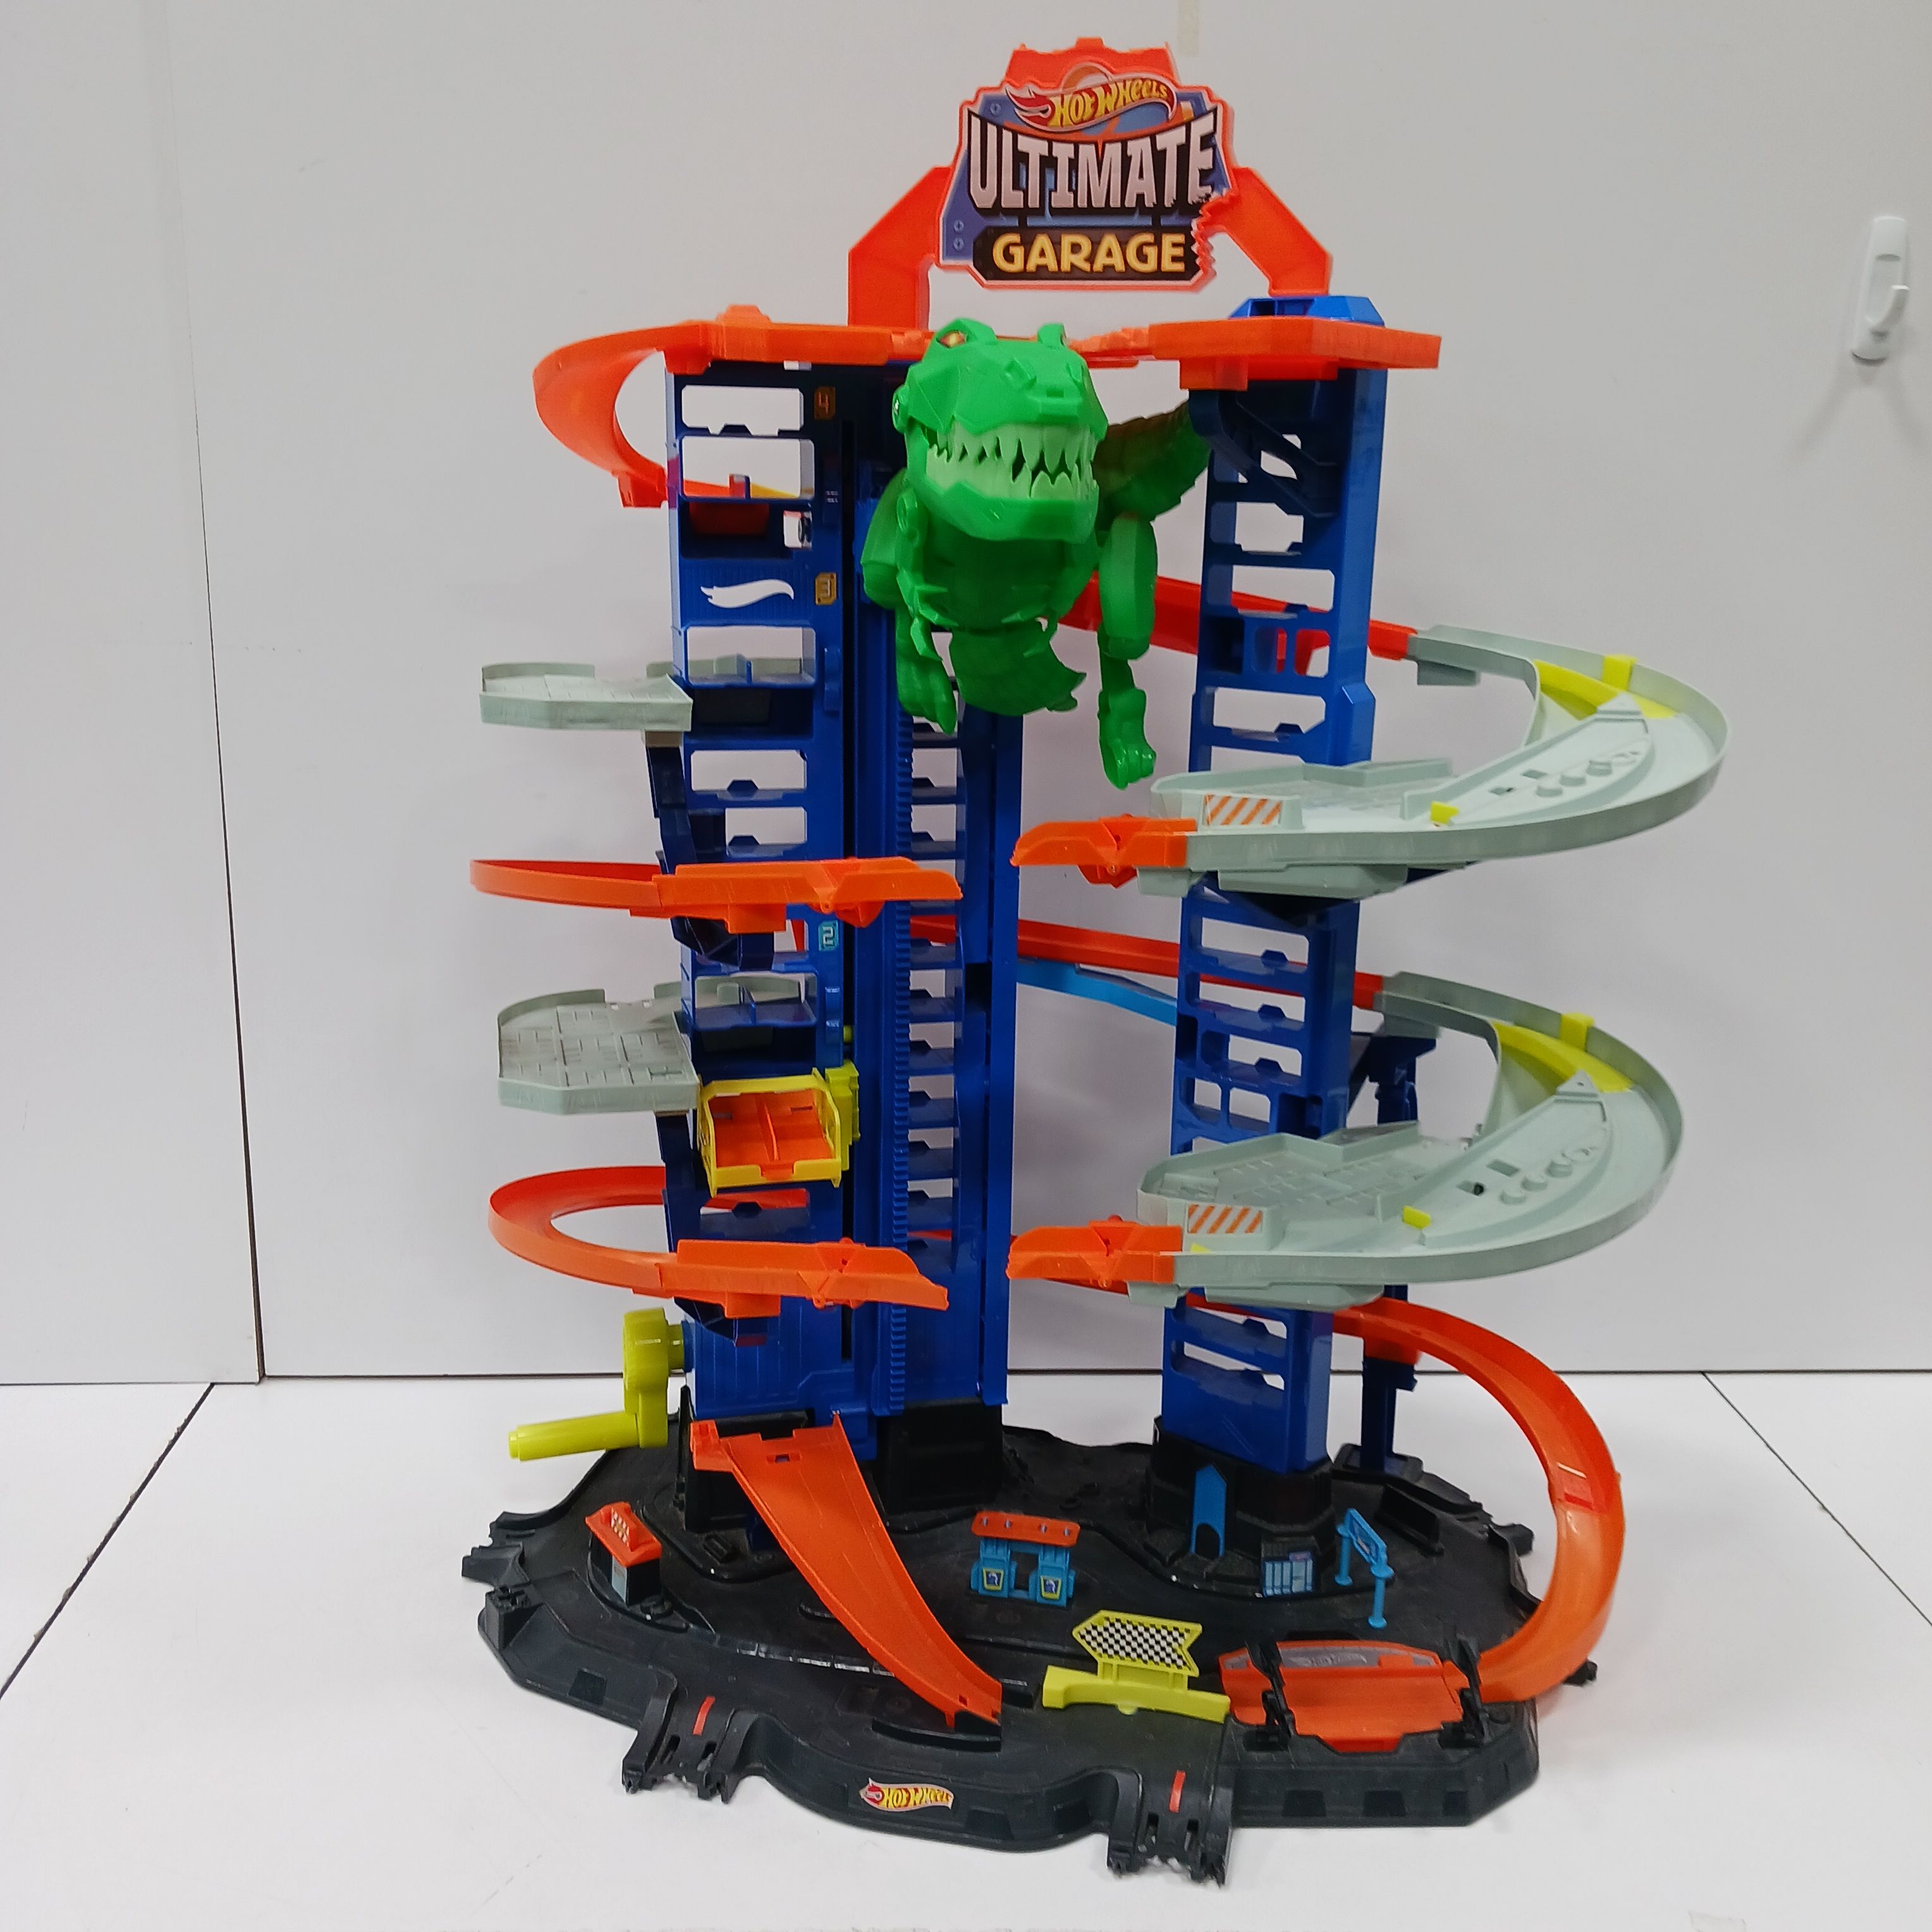 Paradiso Toys City Garage with 3 Levels compatible Hot Wheels Vehicules  PT00144 - Toys and Hobbies 4 All